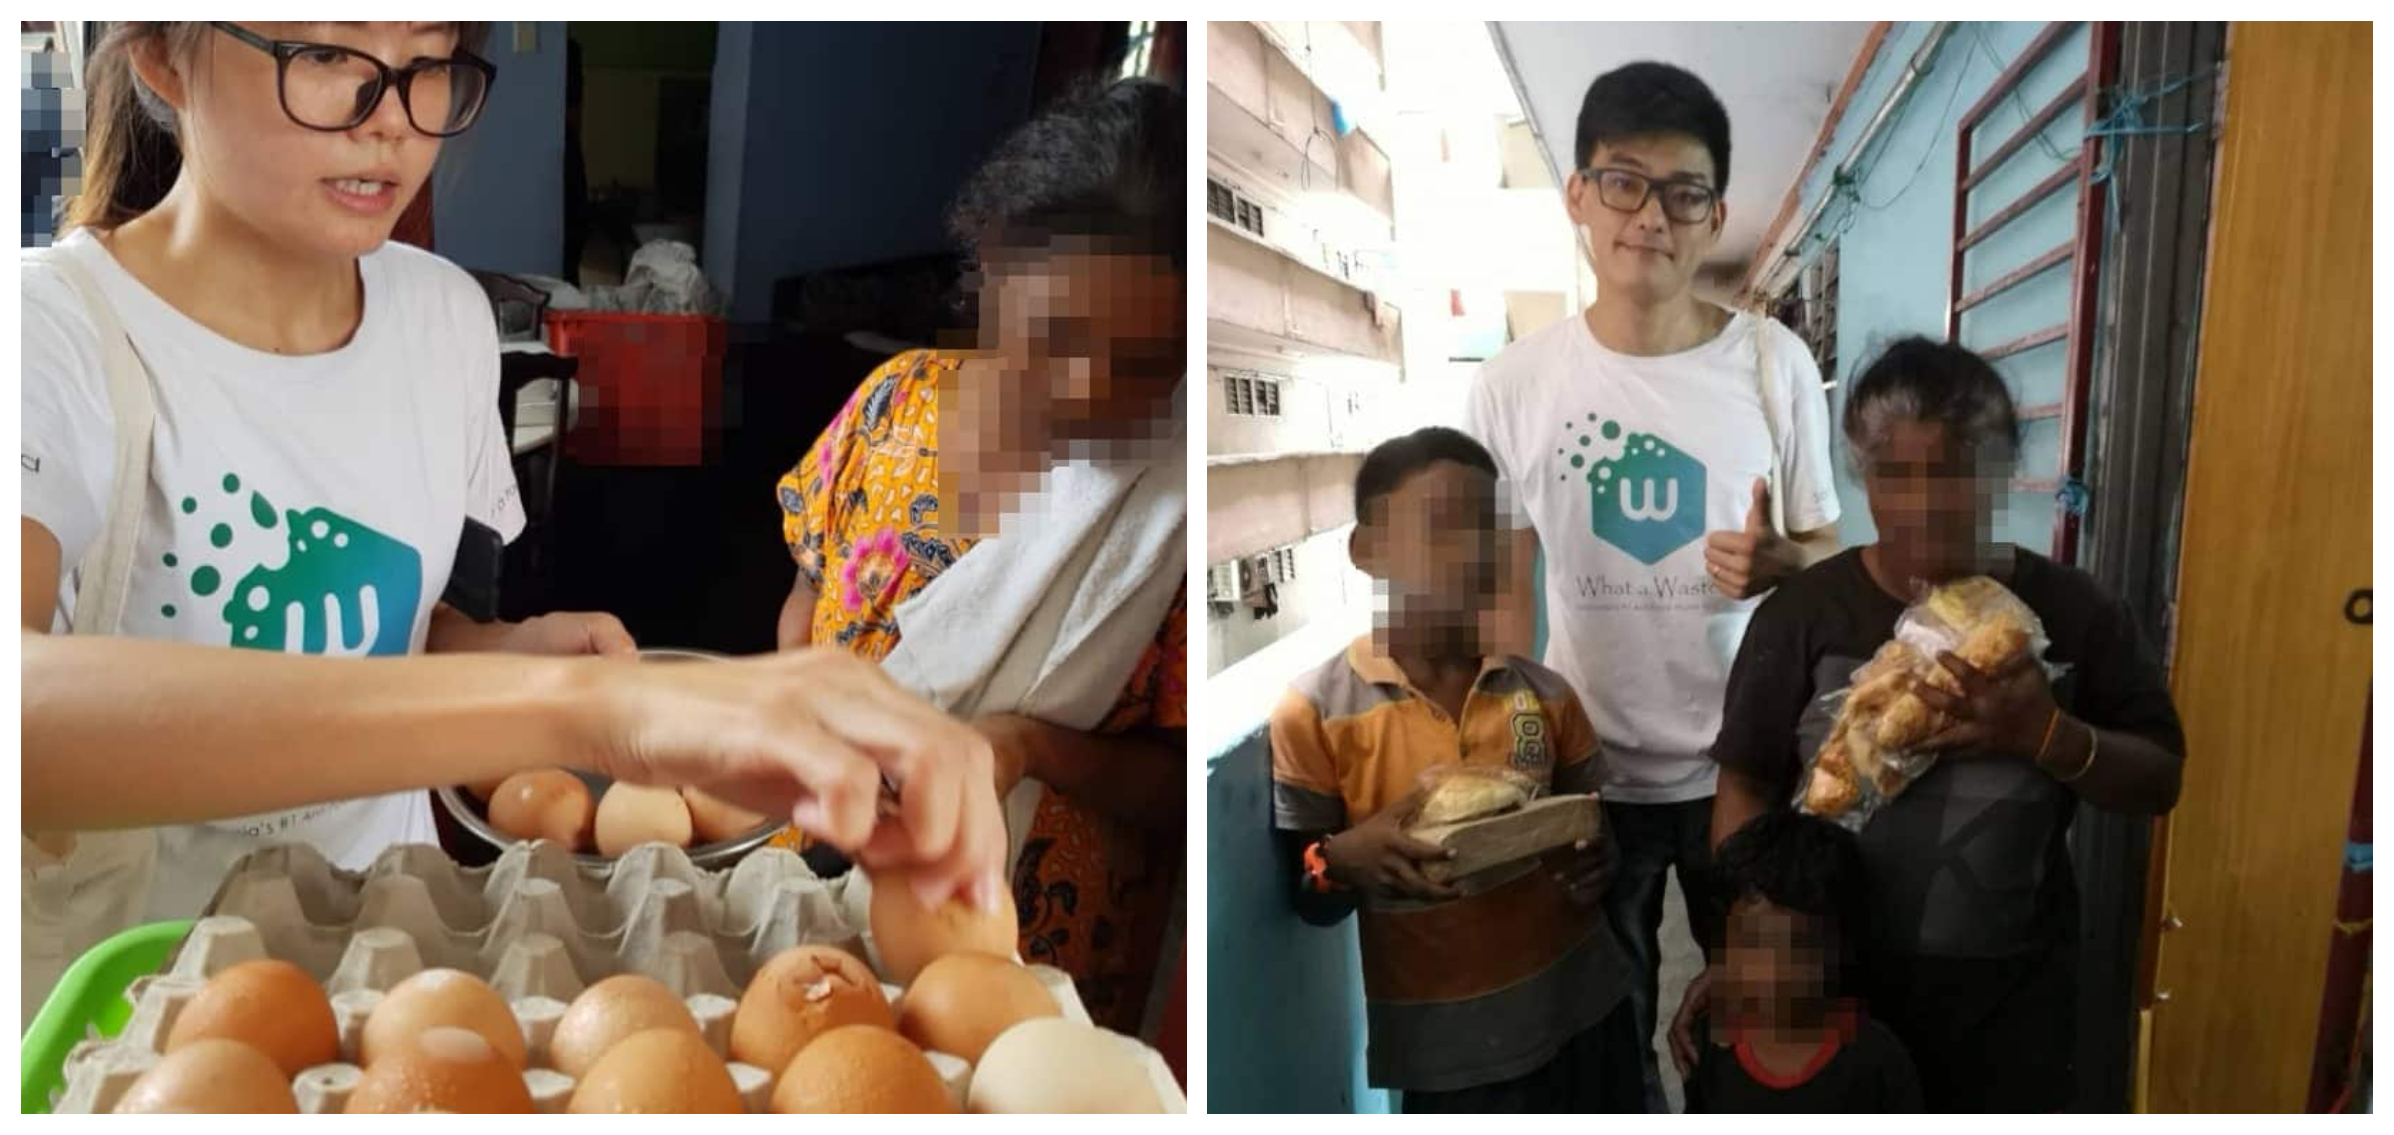 Angela Tan (left) and Alvin Chen (right) with the people they helped.